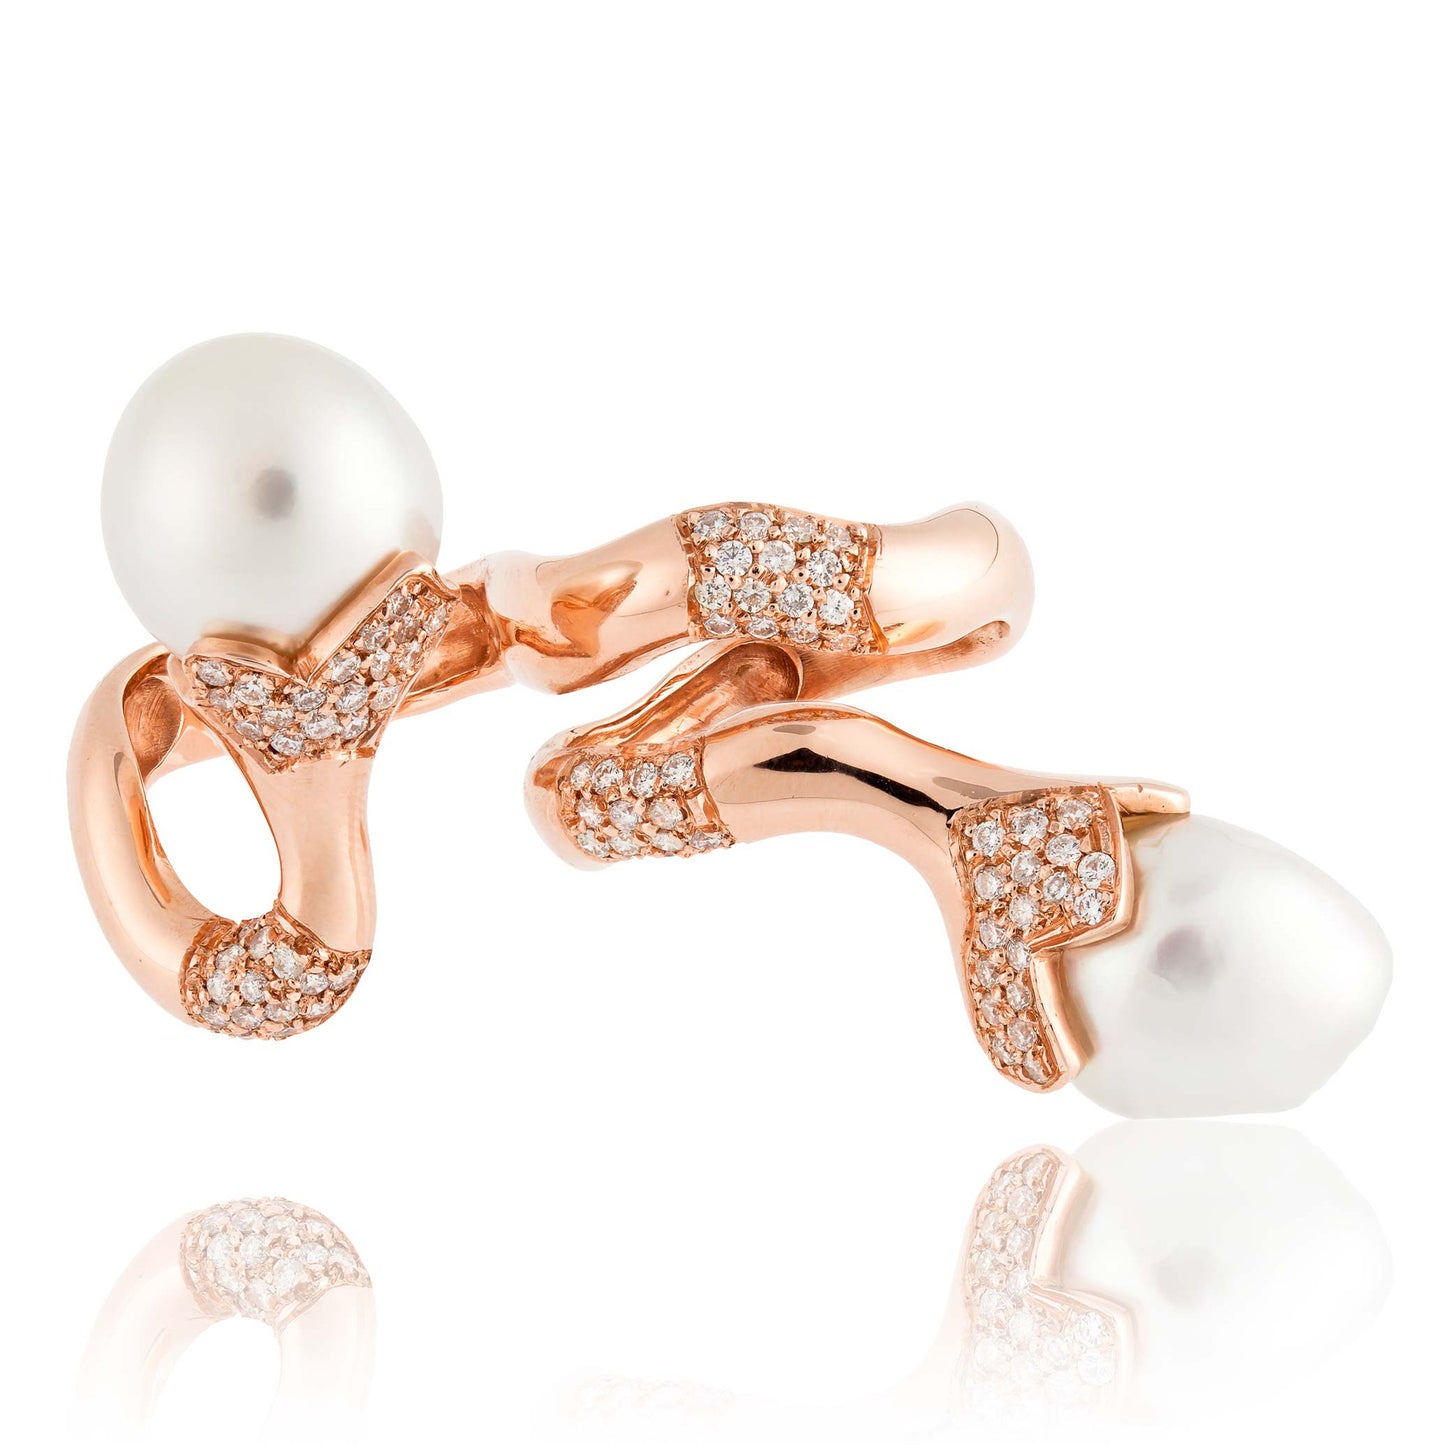 14k Rose Gold Ring with South Sea Pearls and Diamonds